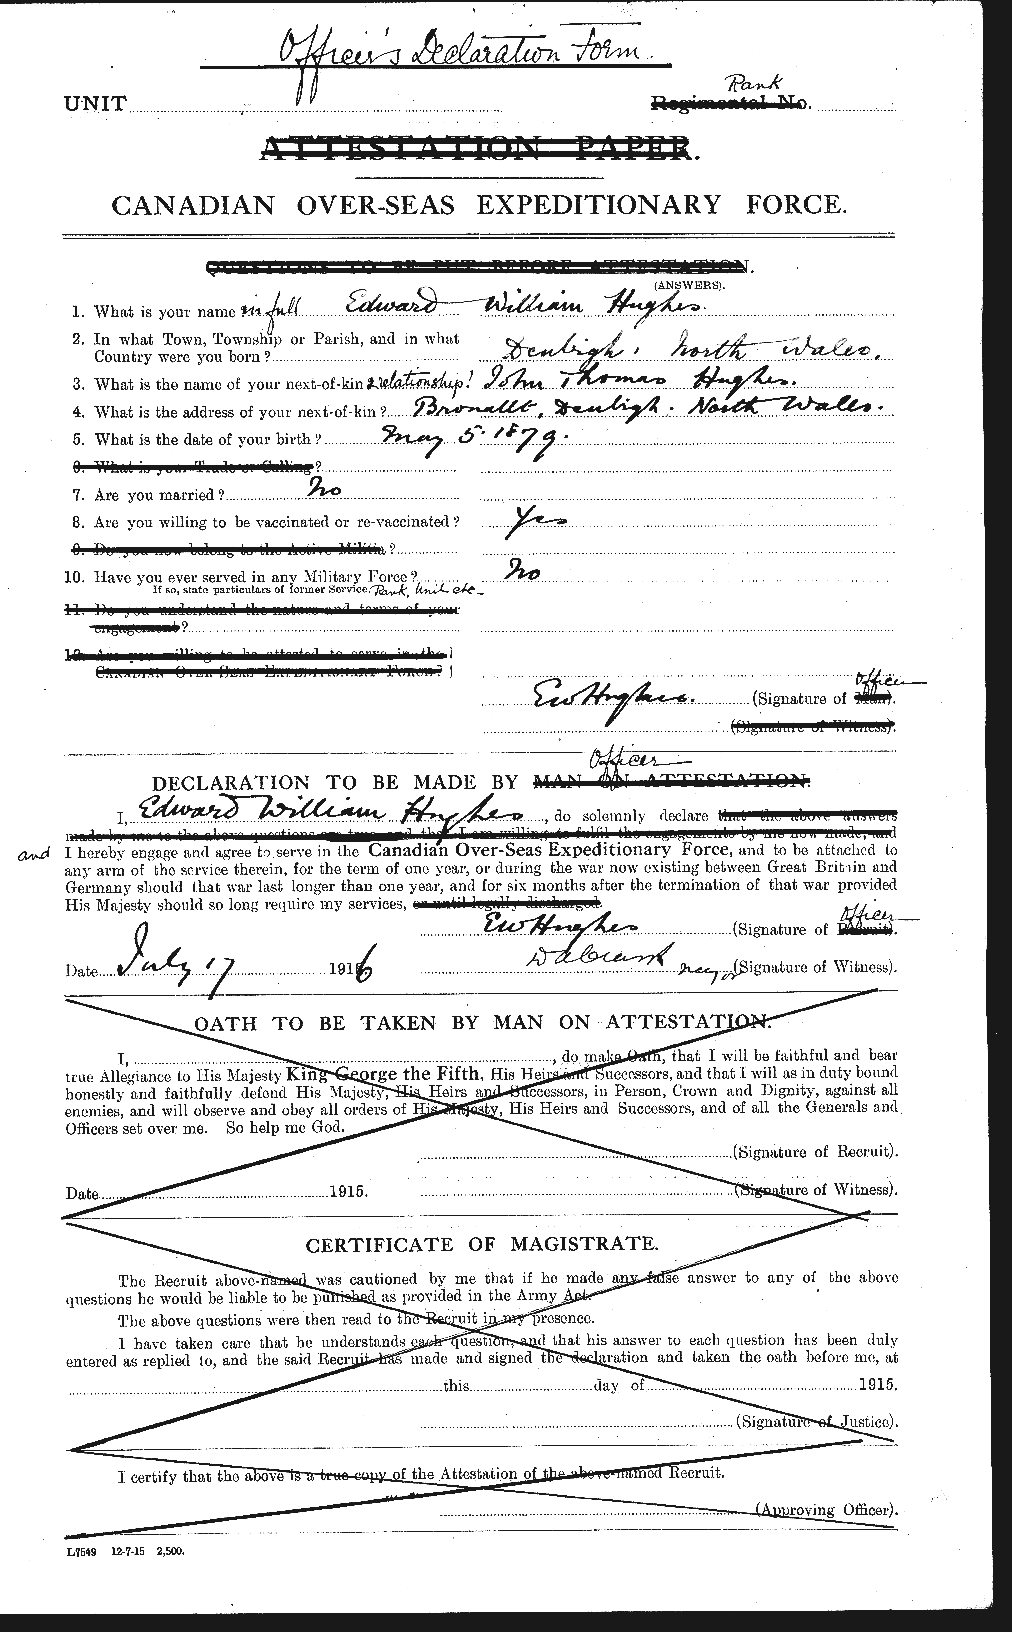 Personnel Records of the First World War - CEF 402693a